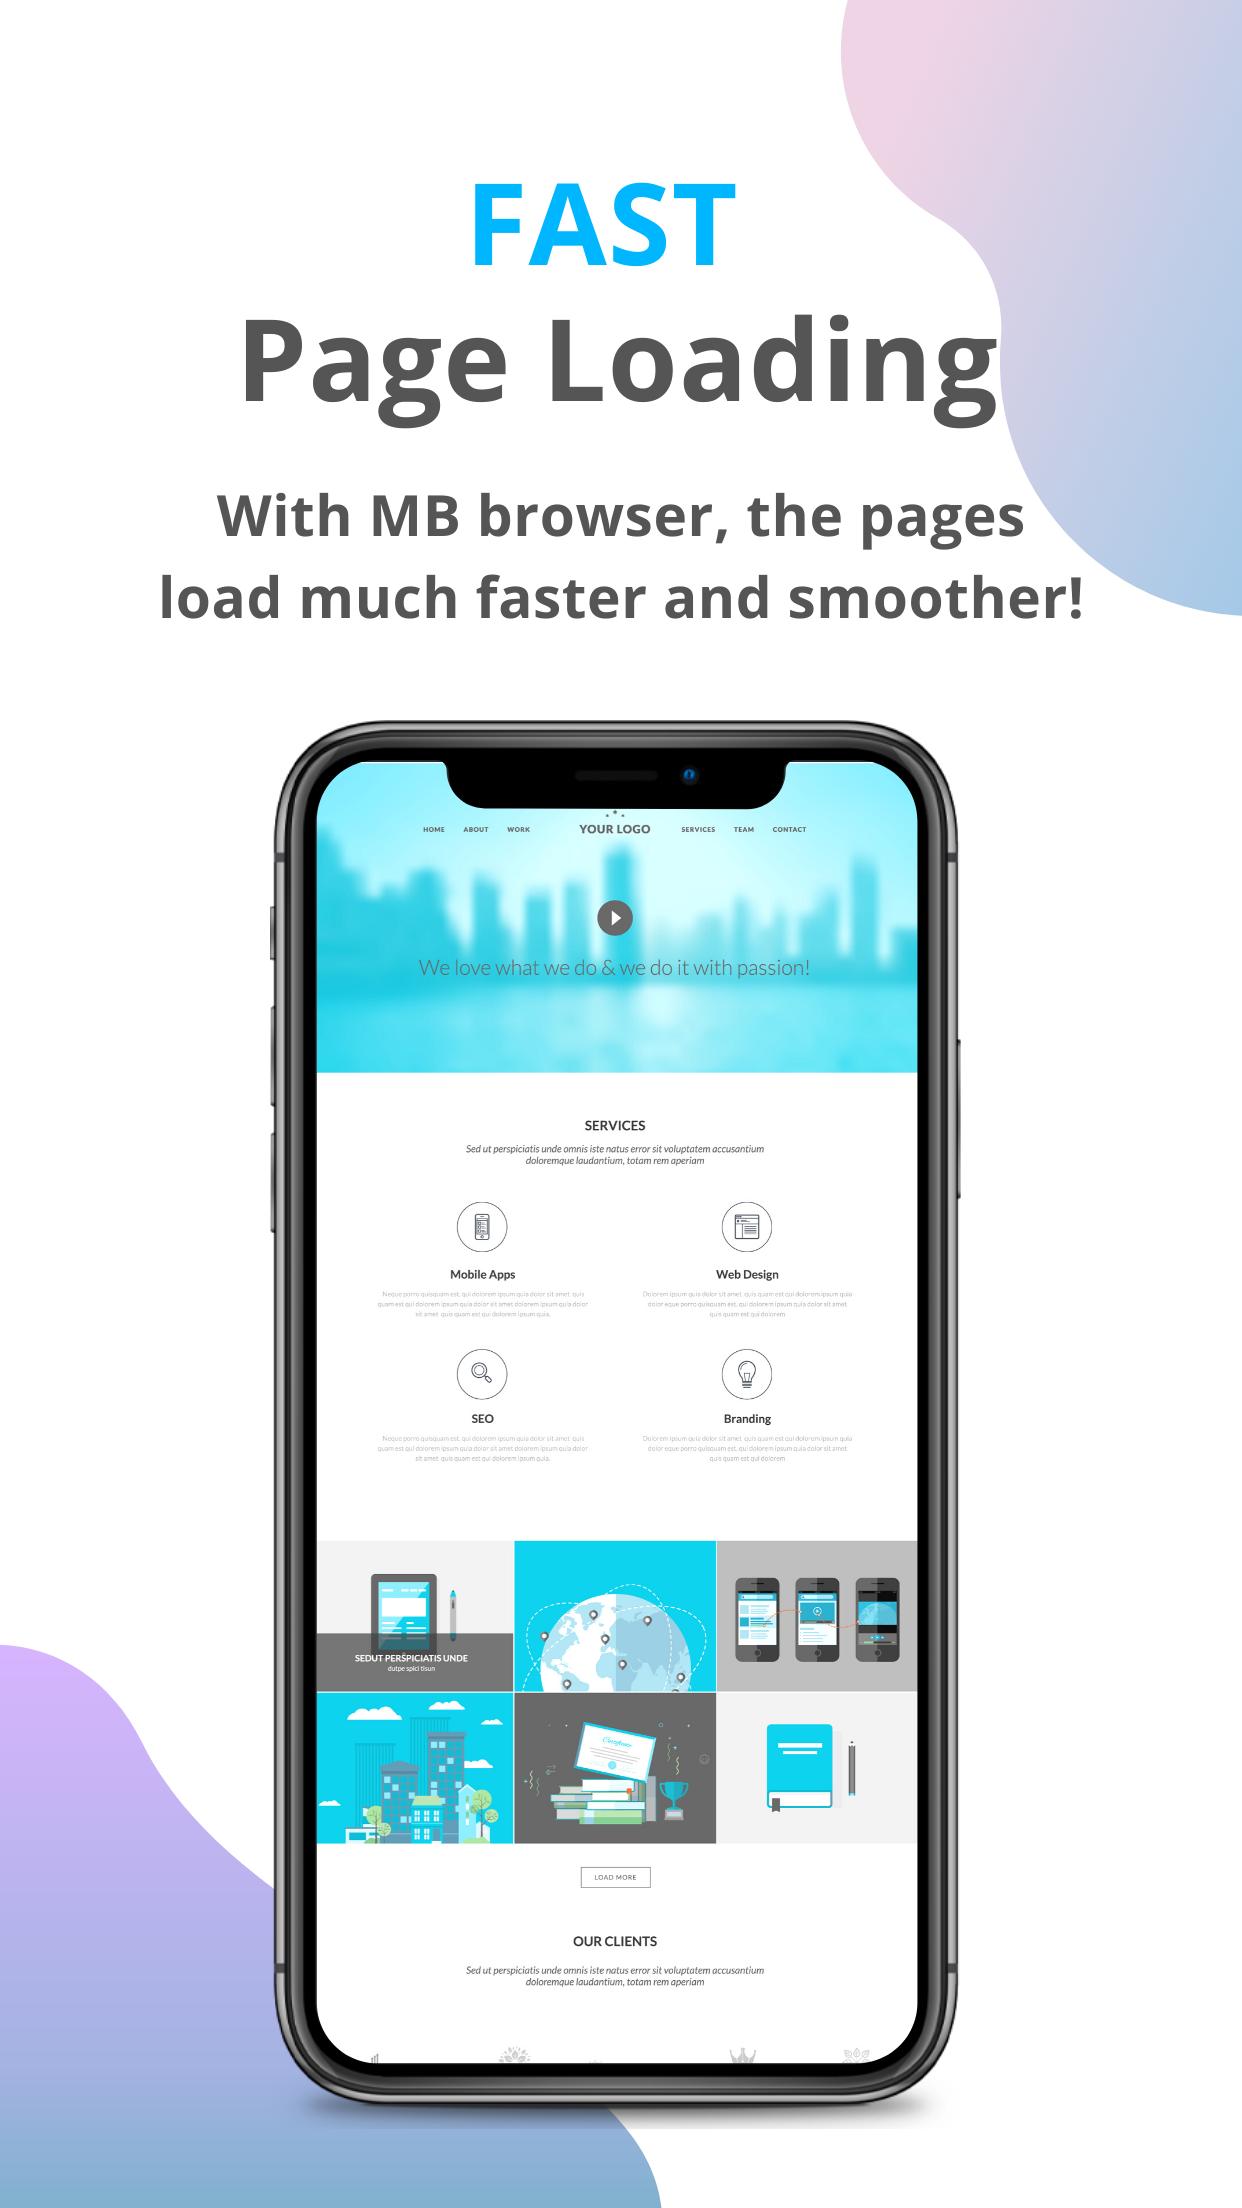 MB Priva Browser：Safe, Private and Fast 0.70 Screenshot 2